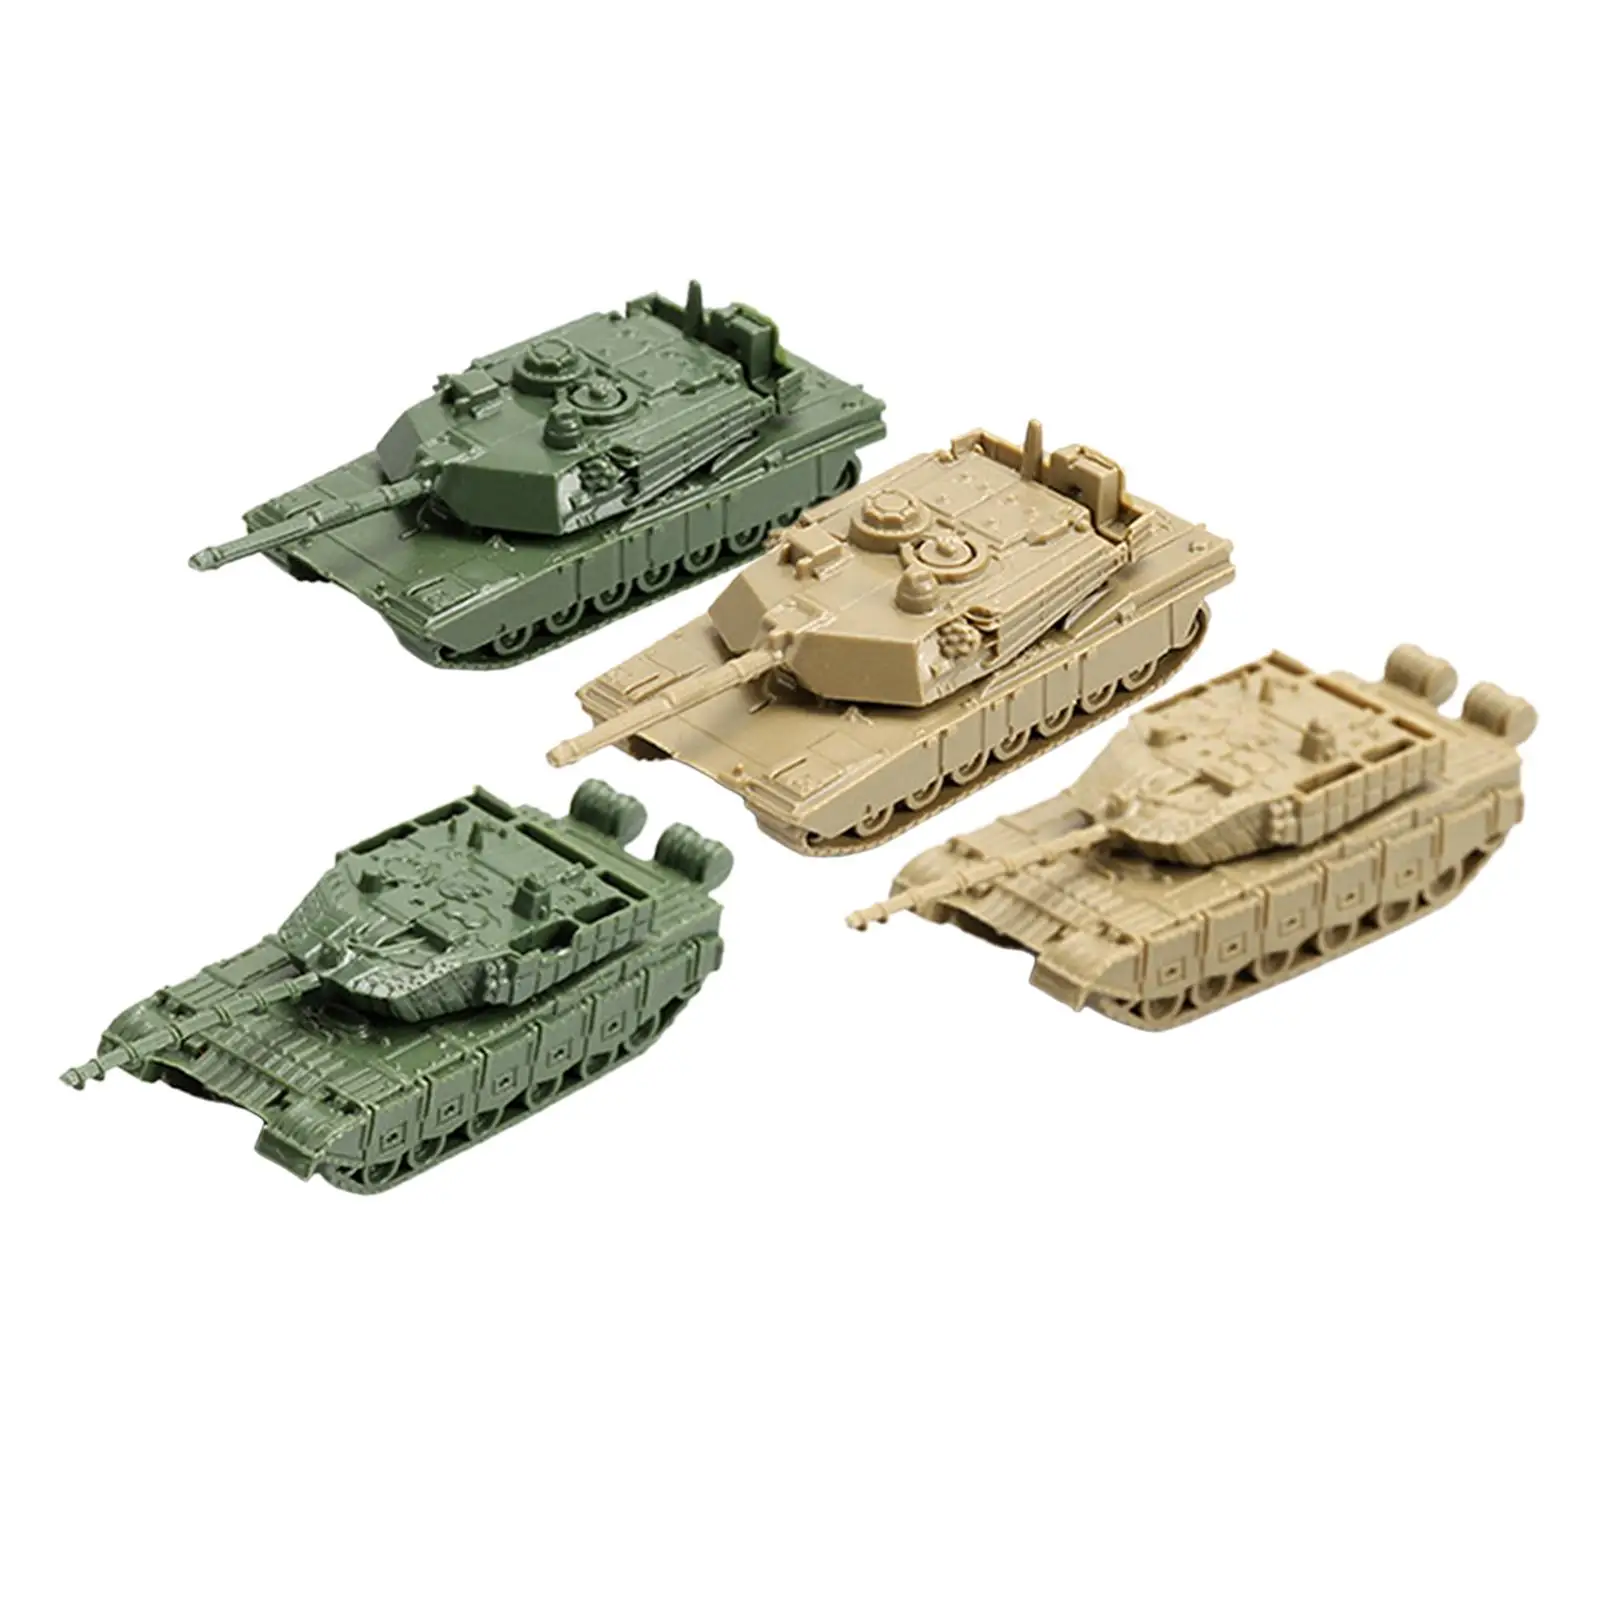 1/144 Tank Model Decorative Gifts Toy Party Favors Building Kits Paper Craft Durable 3D Puzzle for Beginners Boy and Girl